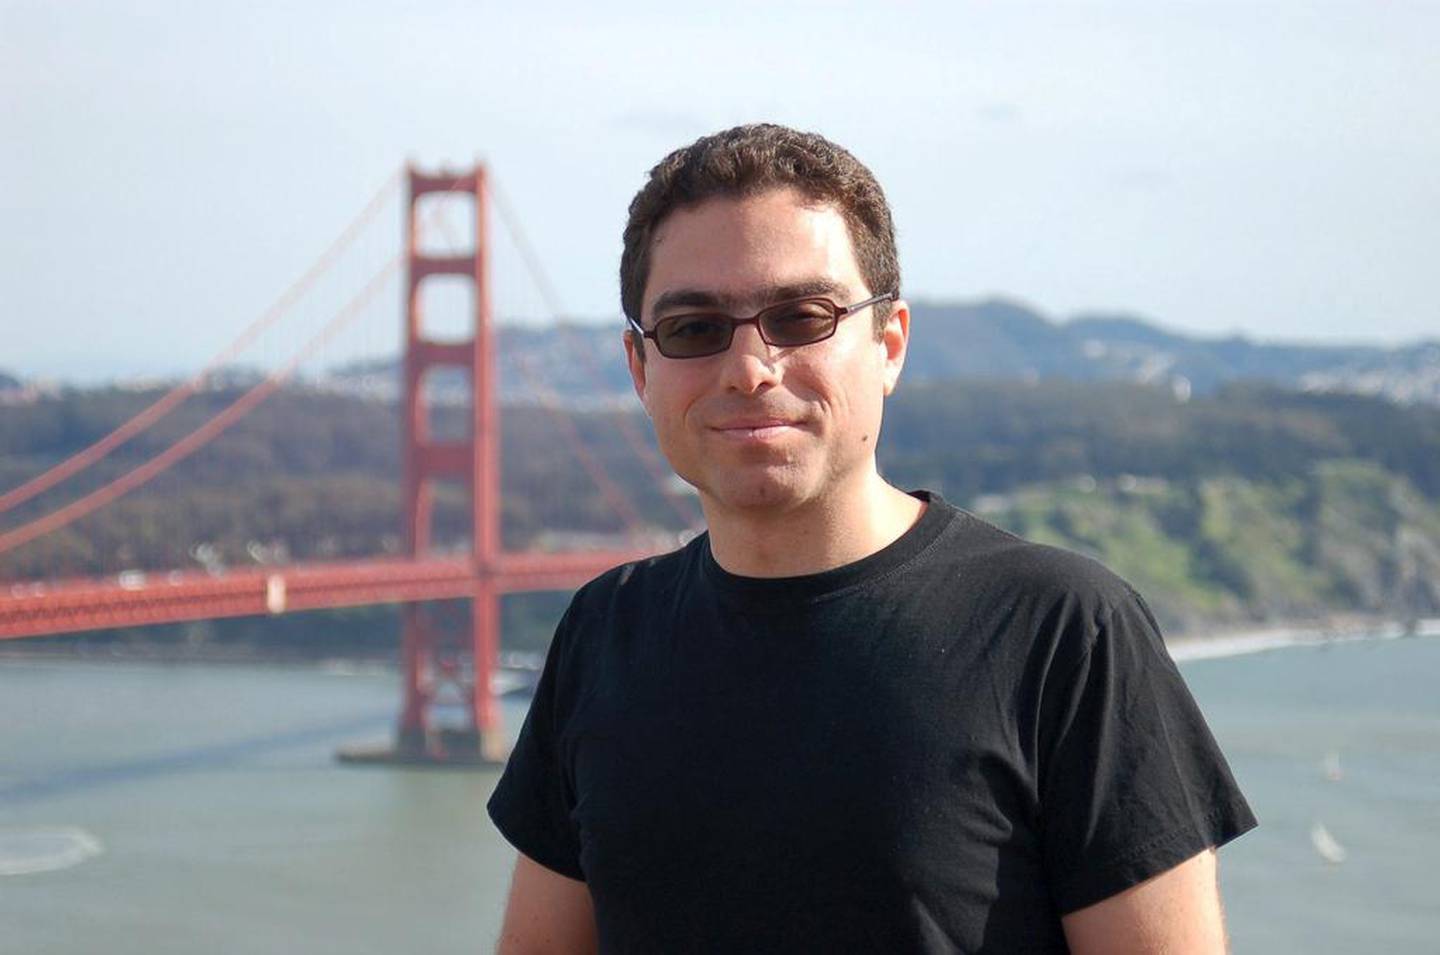 Siamak Namazi was jailed for 10 years in 2016 in Iran alongside his father, Baquer. Reuters